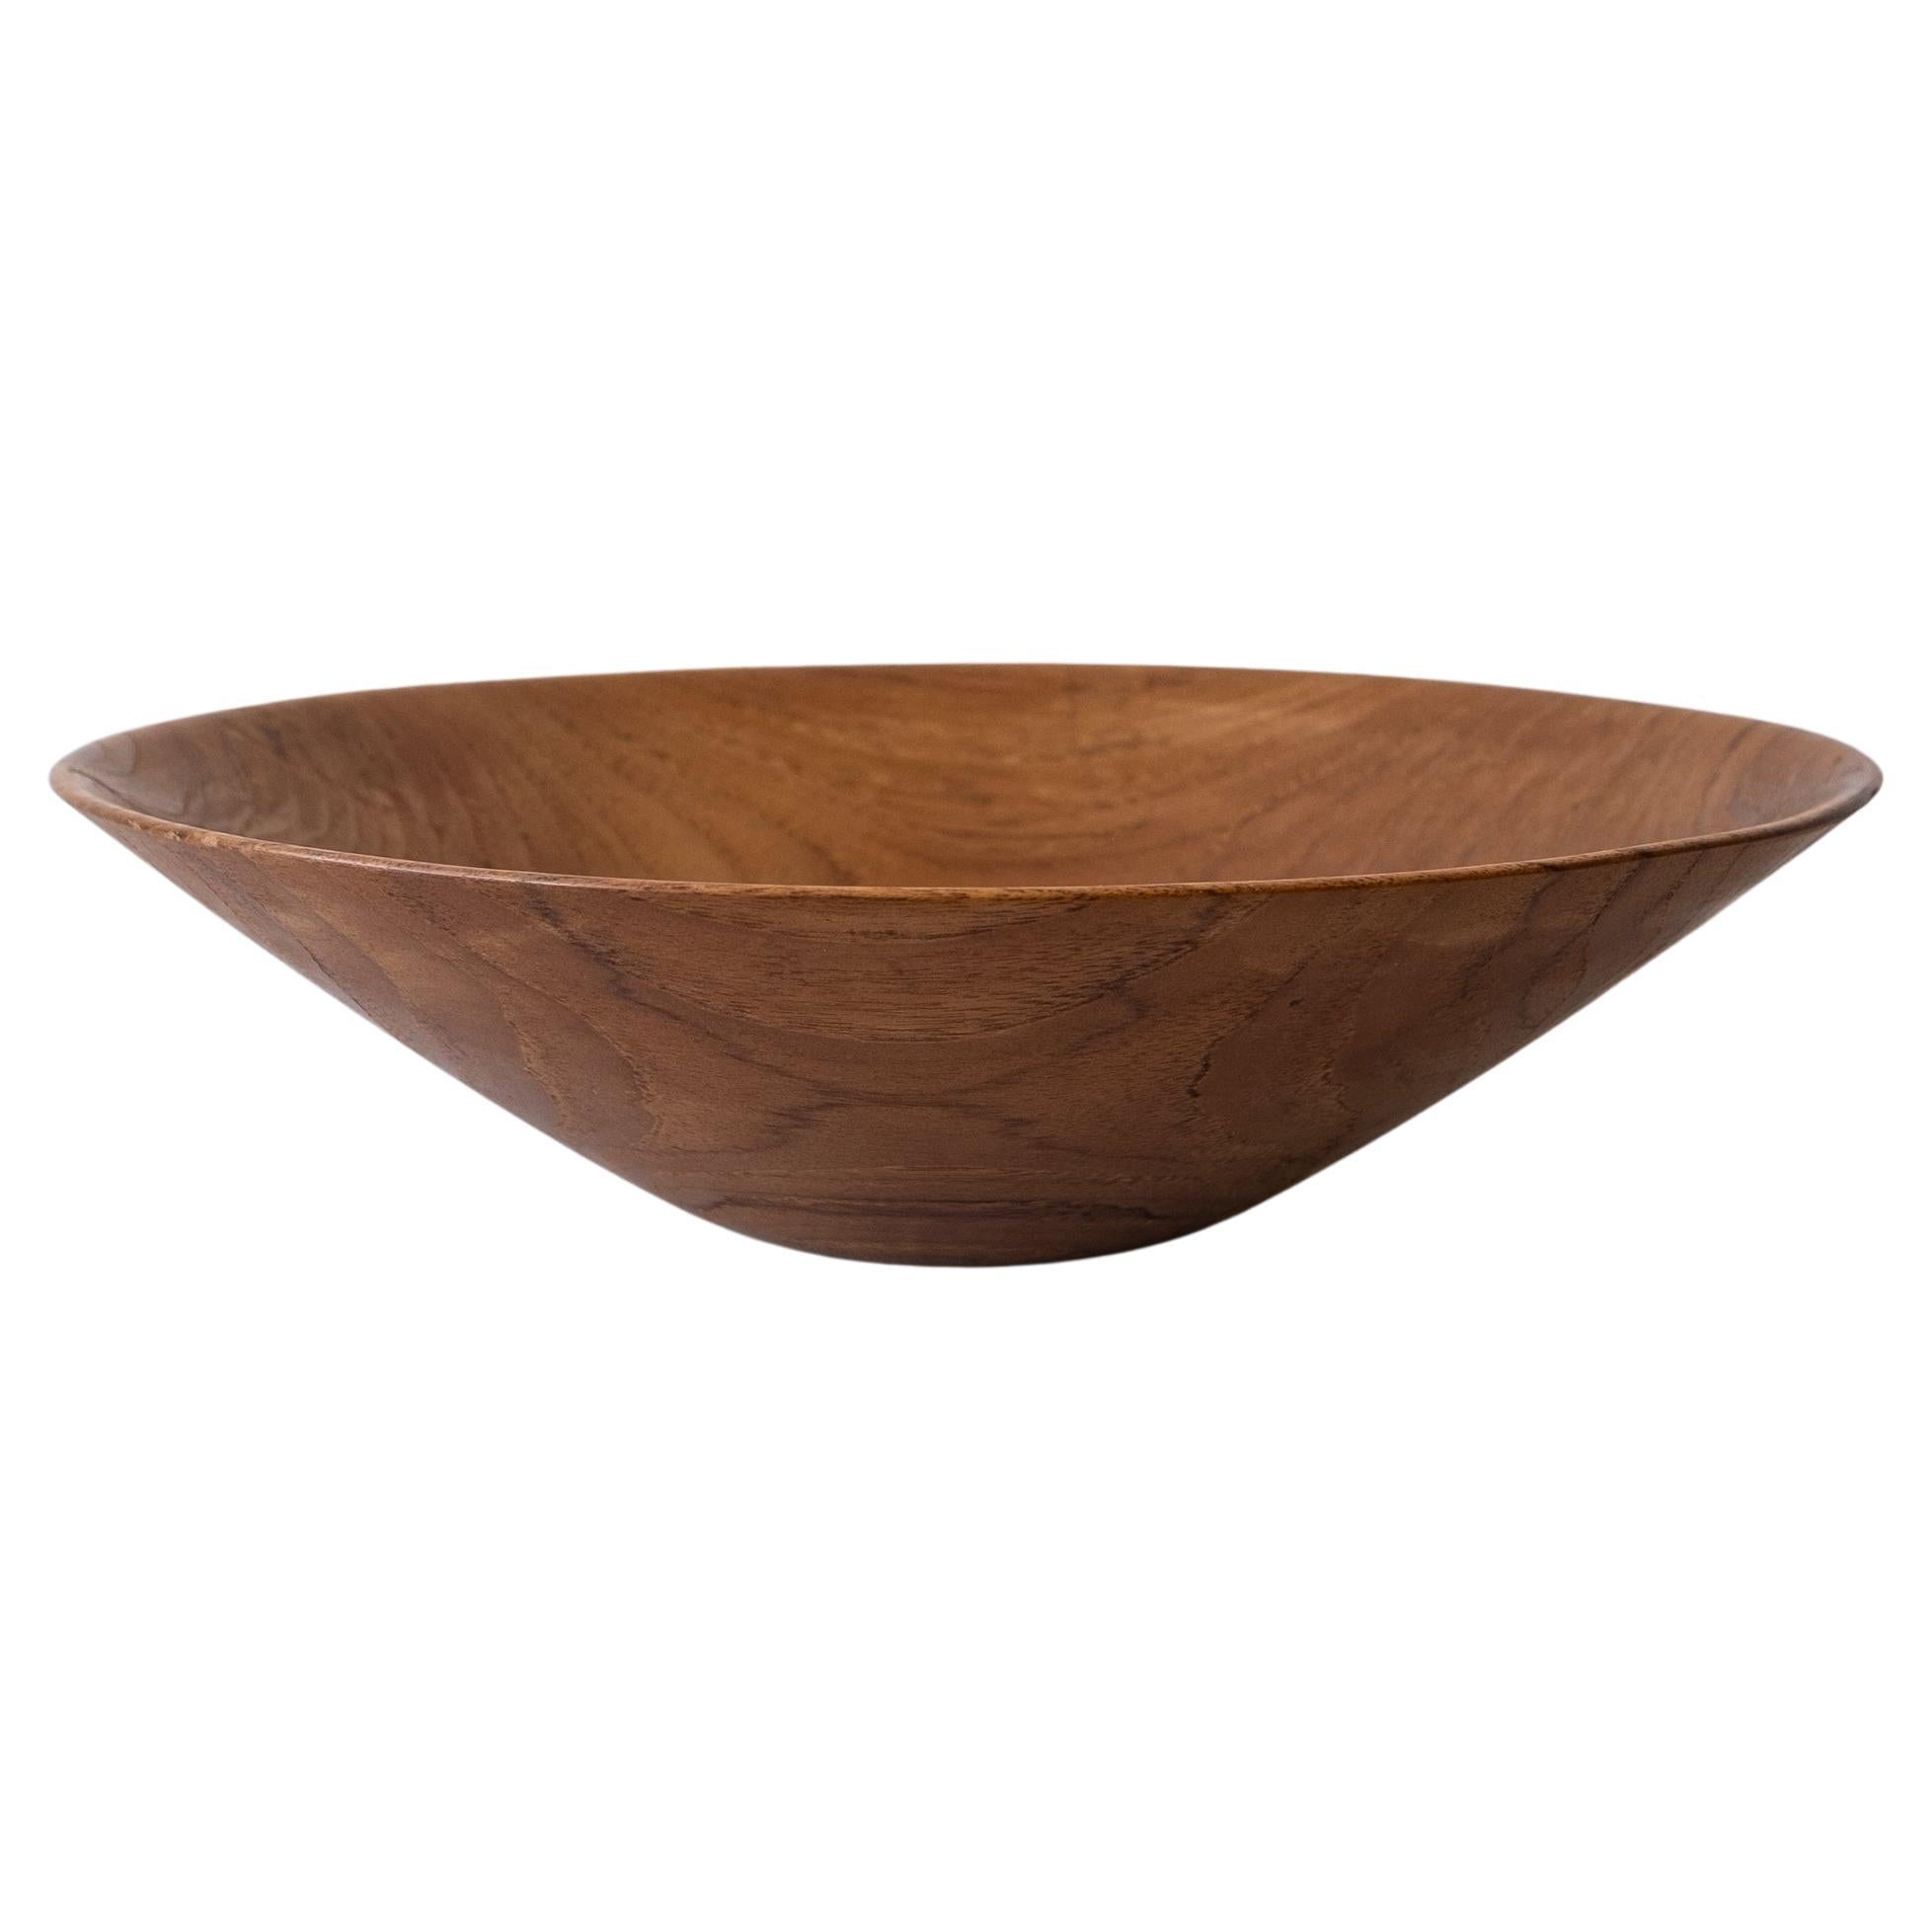 Shigemichi Aomine Modernist Japanese Wood Bowl for the National Craft Council For Sale